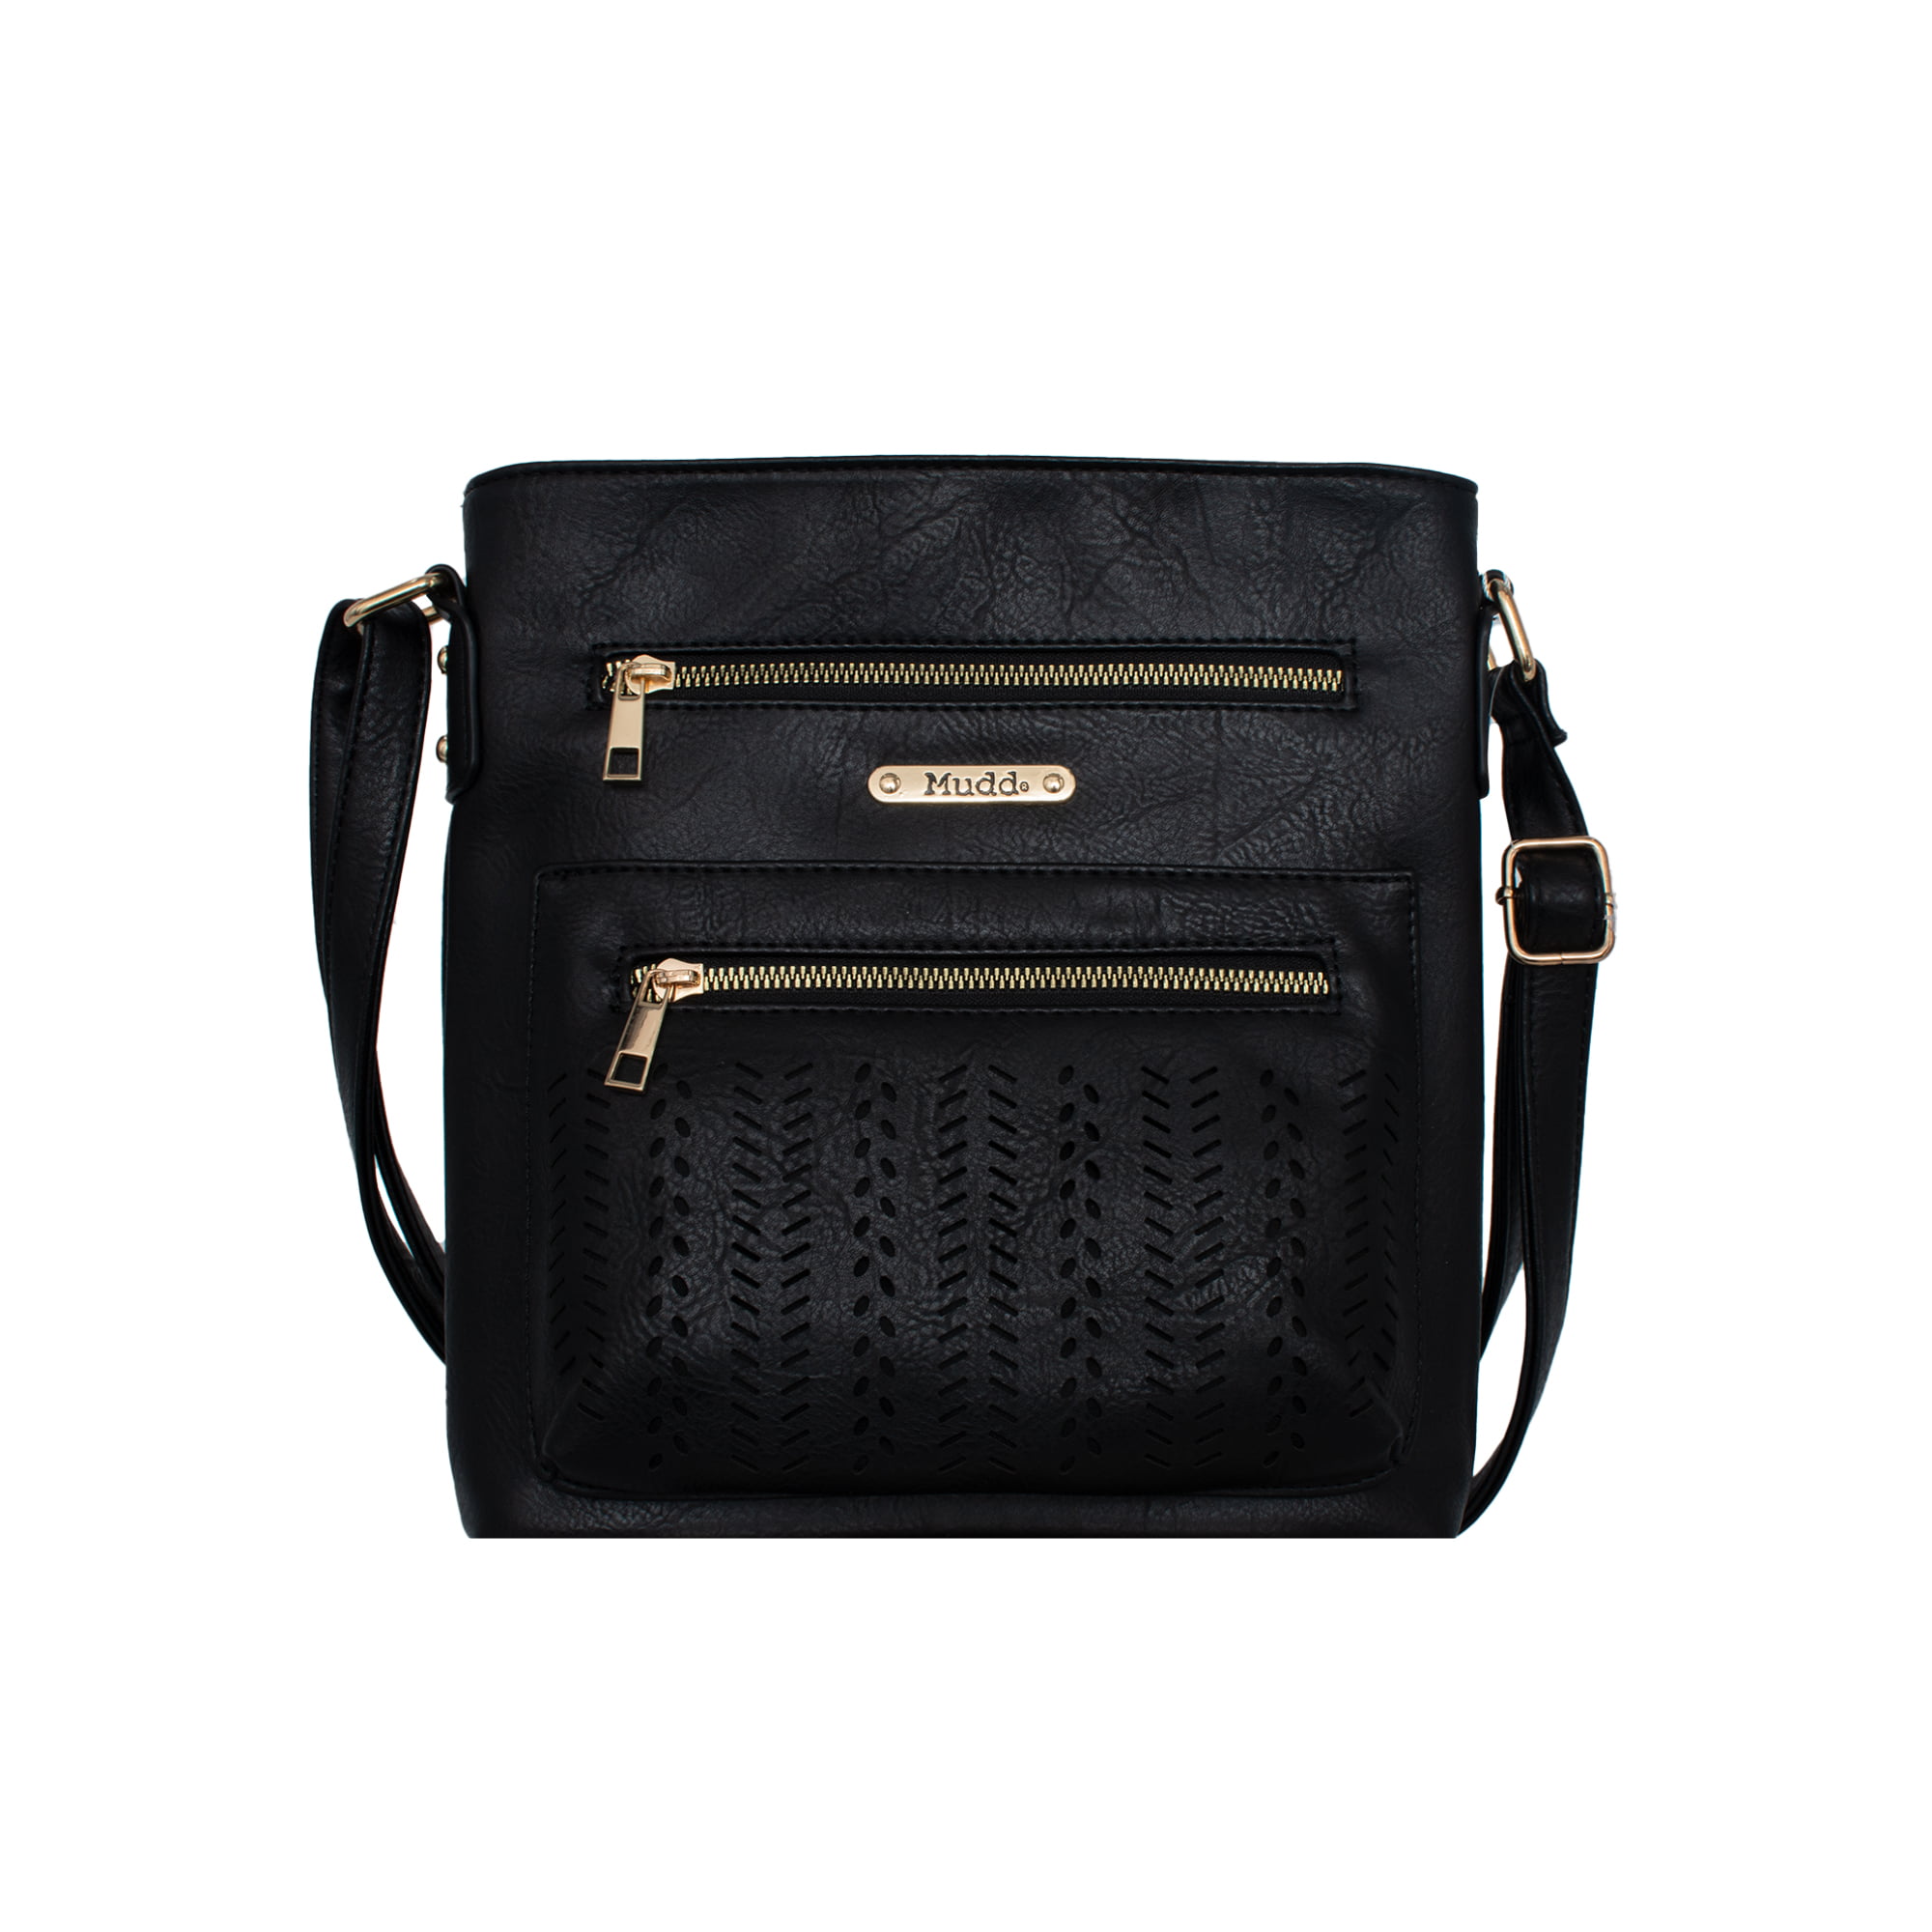 Mudd Women's Vegan Leather Black Perforated Cross Body With Adjustable ...